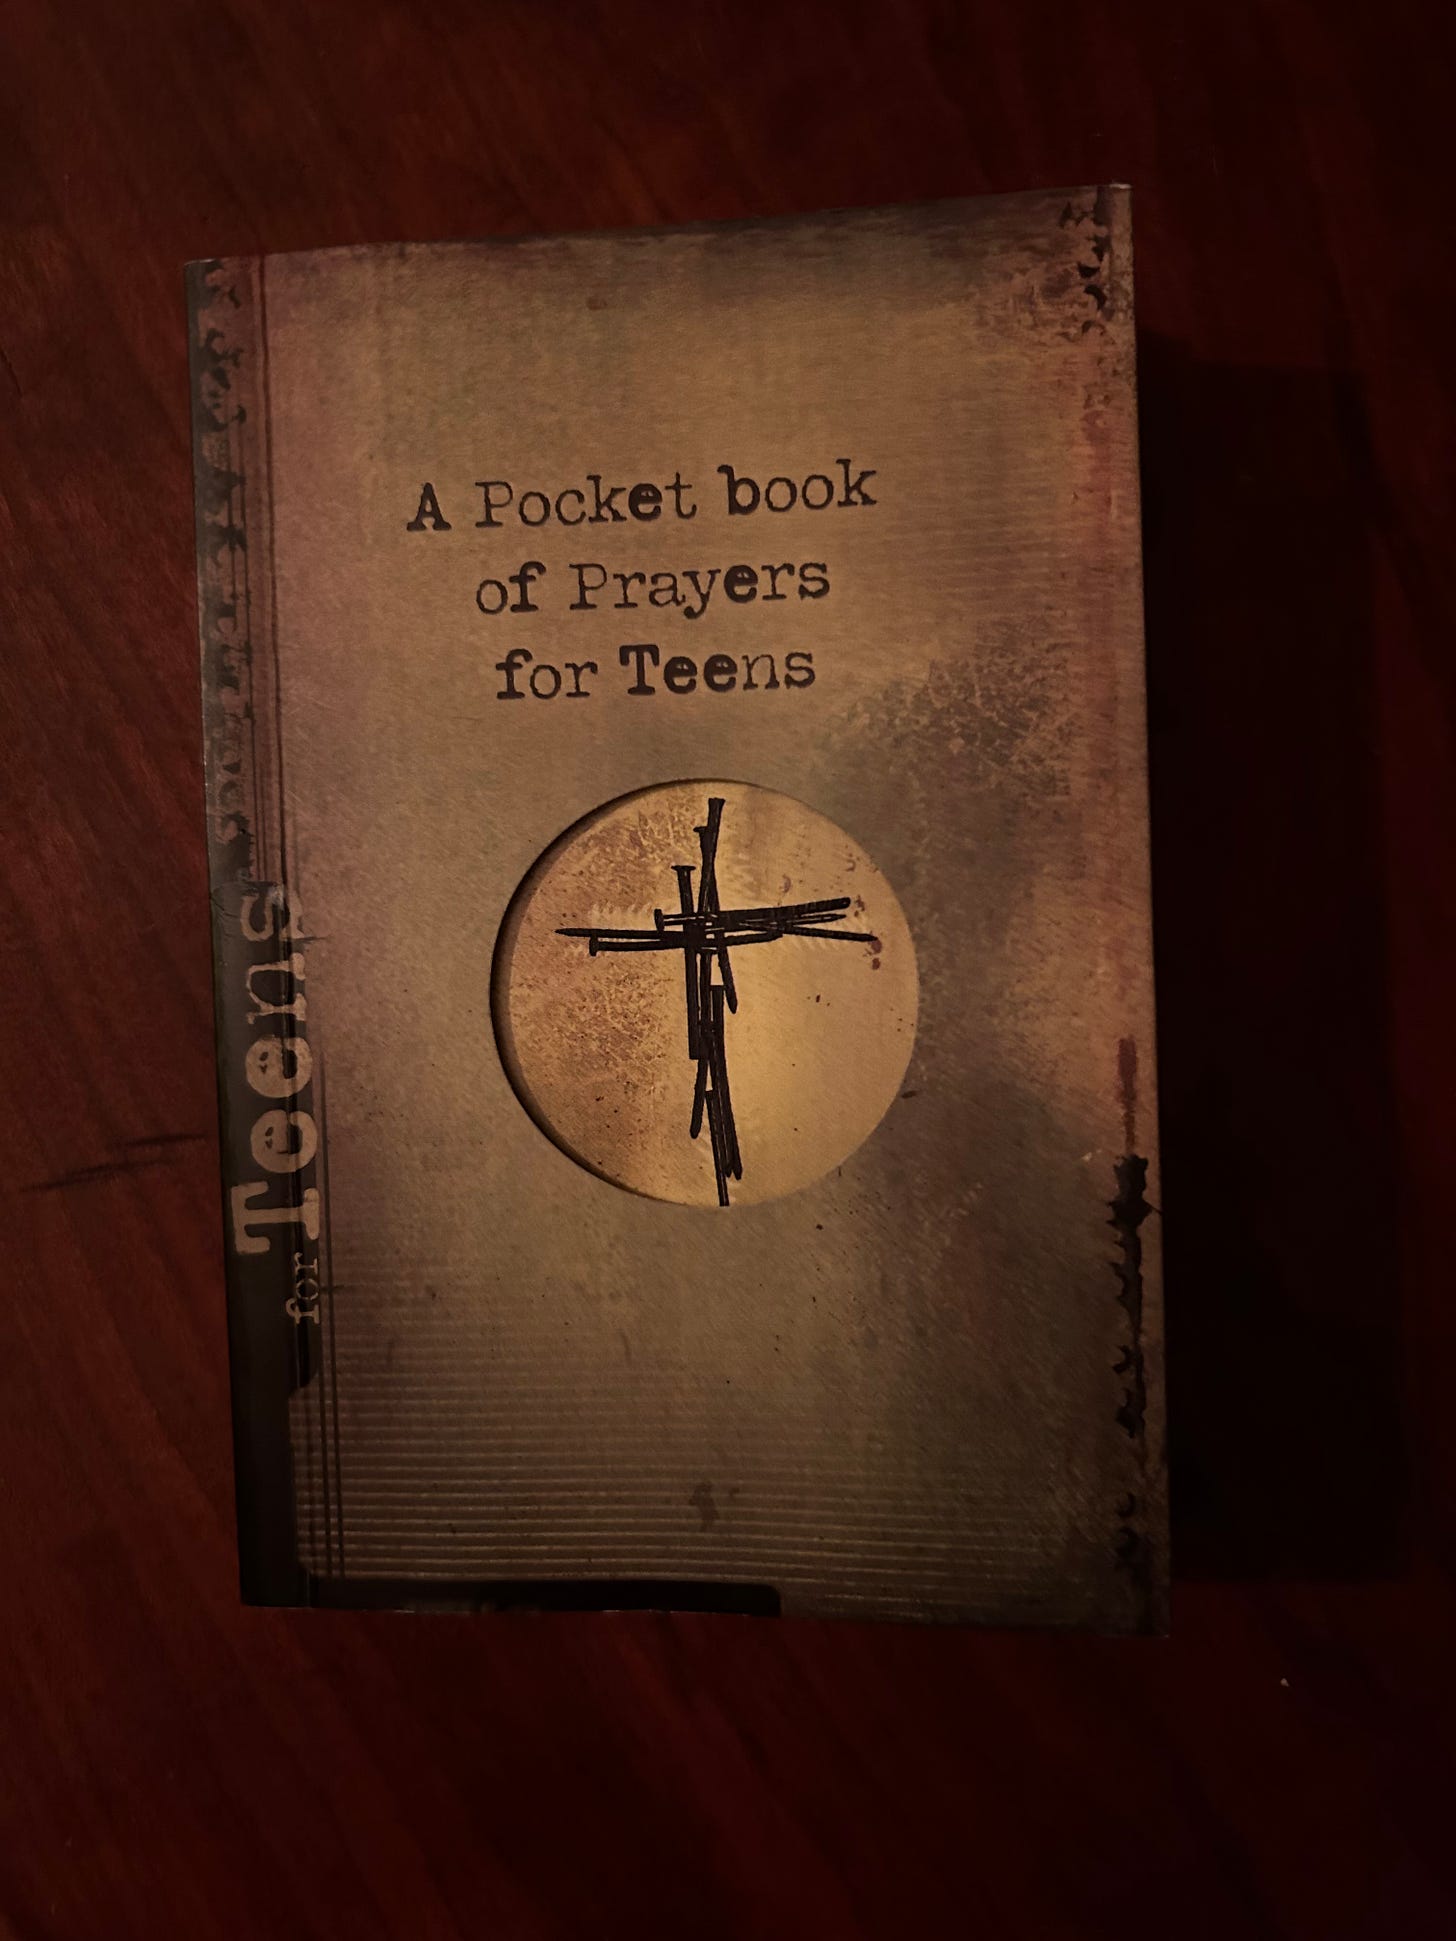 A little book entitled A Pocket Book of Prayers for Teens with an image of a cross made from nails. The book lies on a wooden table.